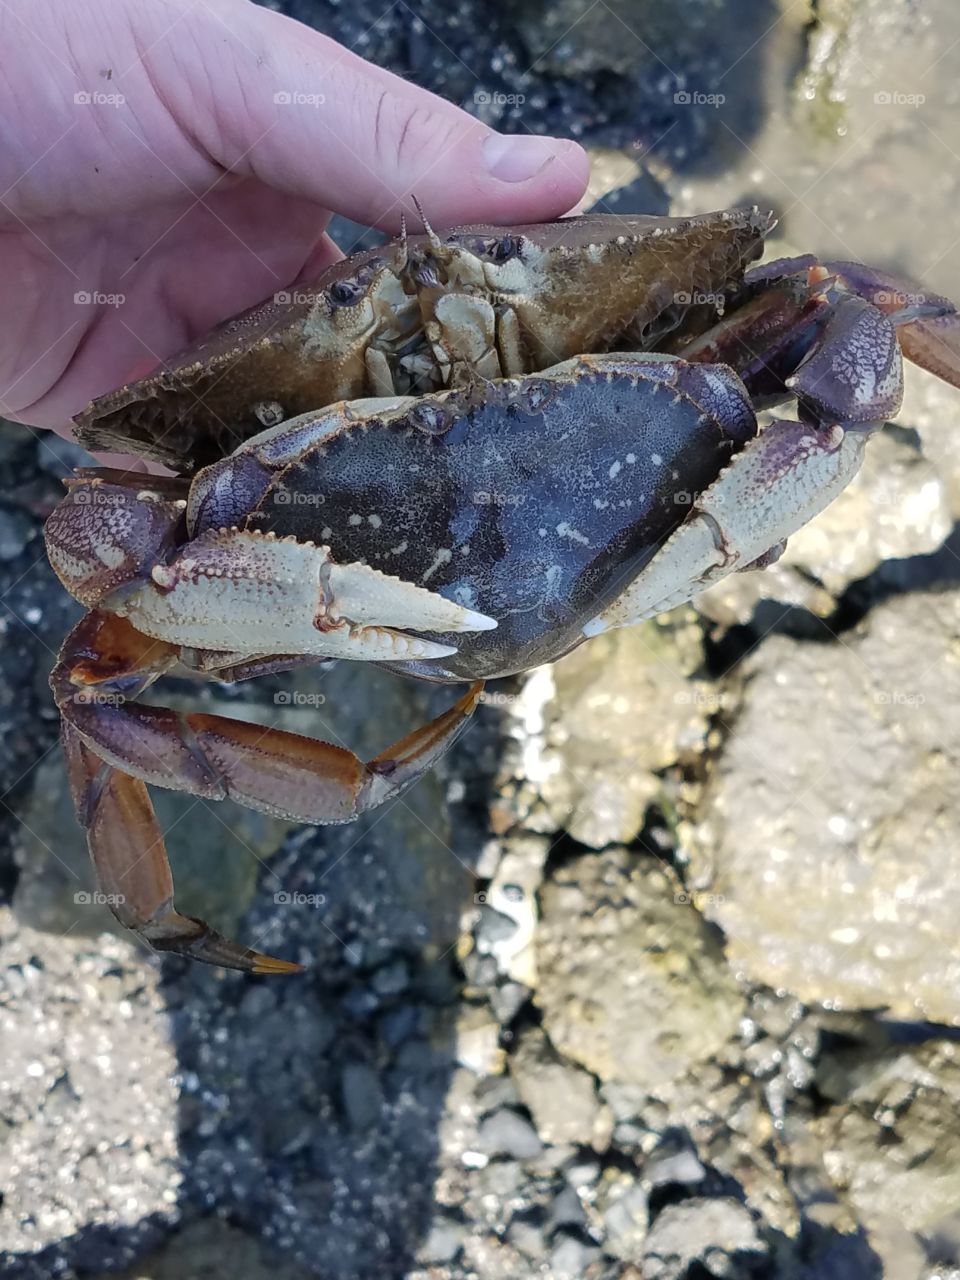 crabs sharing the love